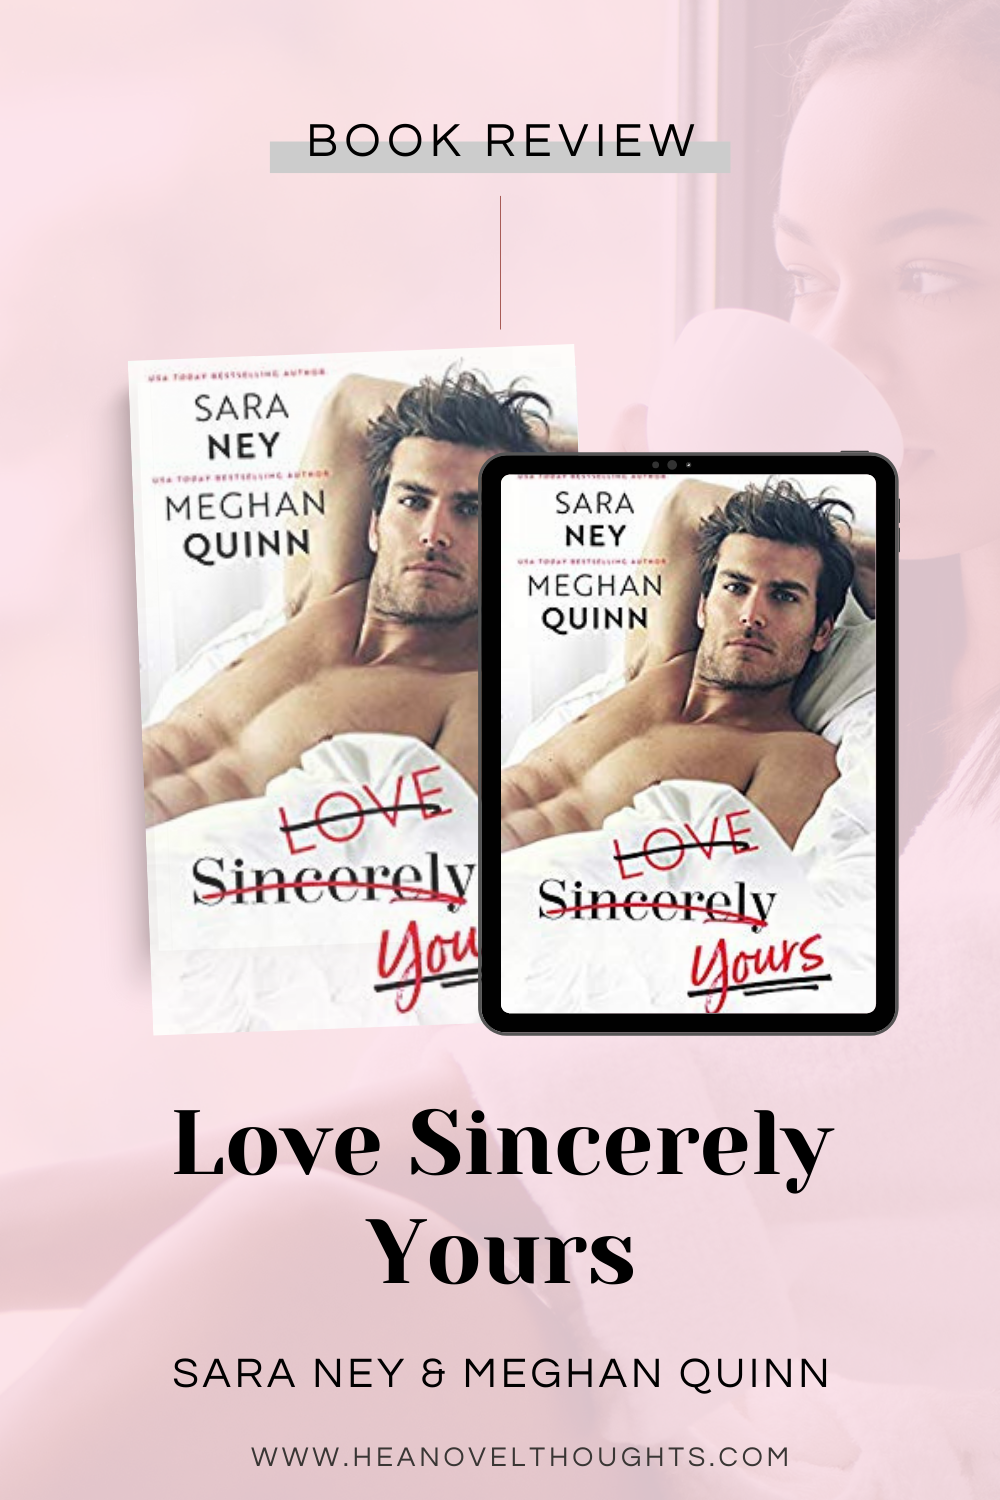 Love, Sincerely, Yours by Meghan Quinn and Sara Ney